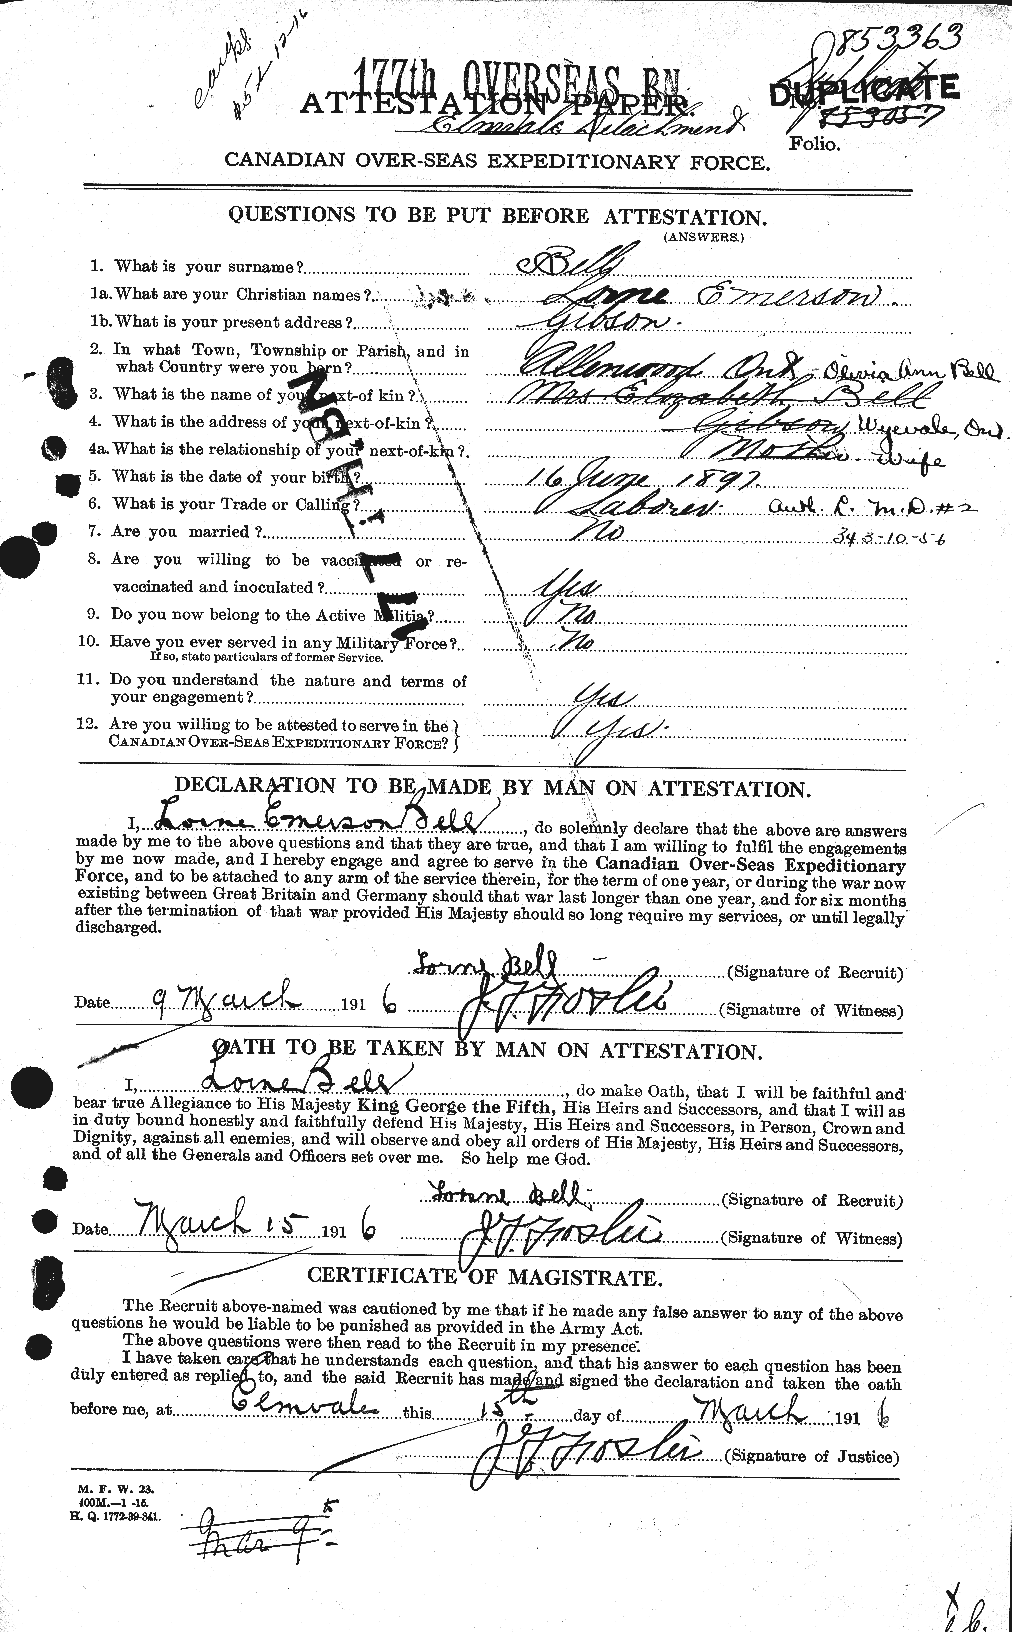 Personnel Records of the First World War - CEF 234527a